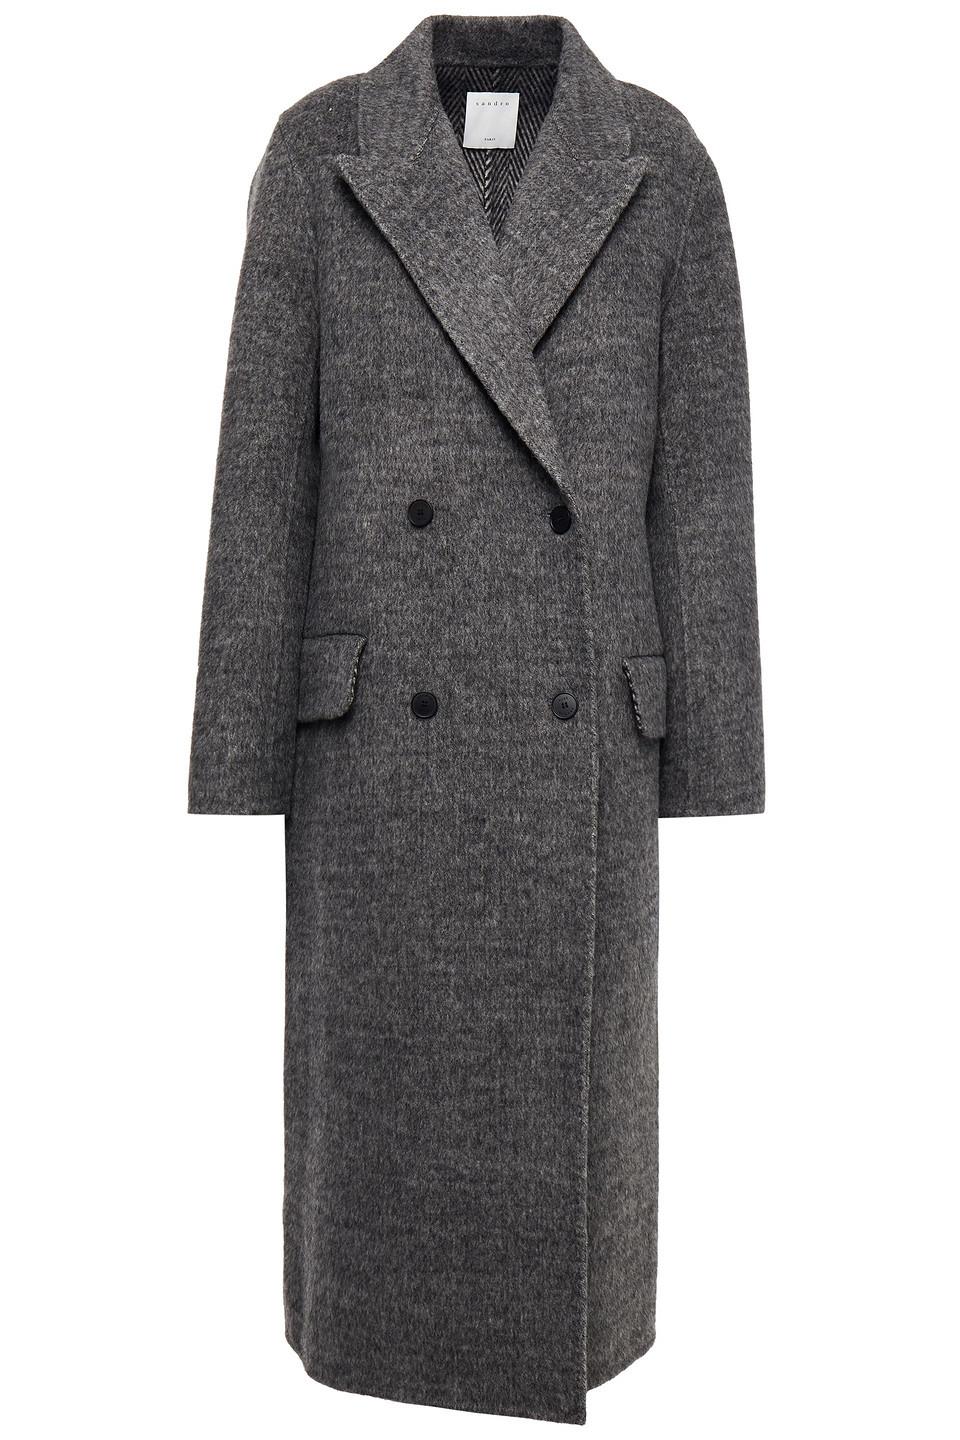 Sandro Juno Double-breasted Brushed Wool-blend Felt Coat in Gray | Lyst